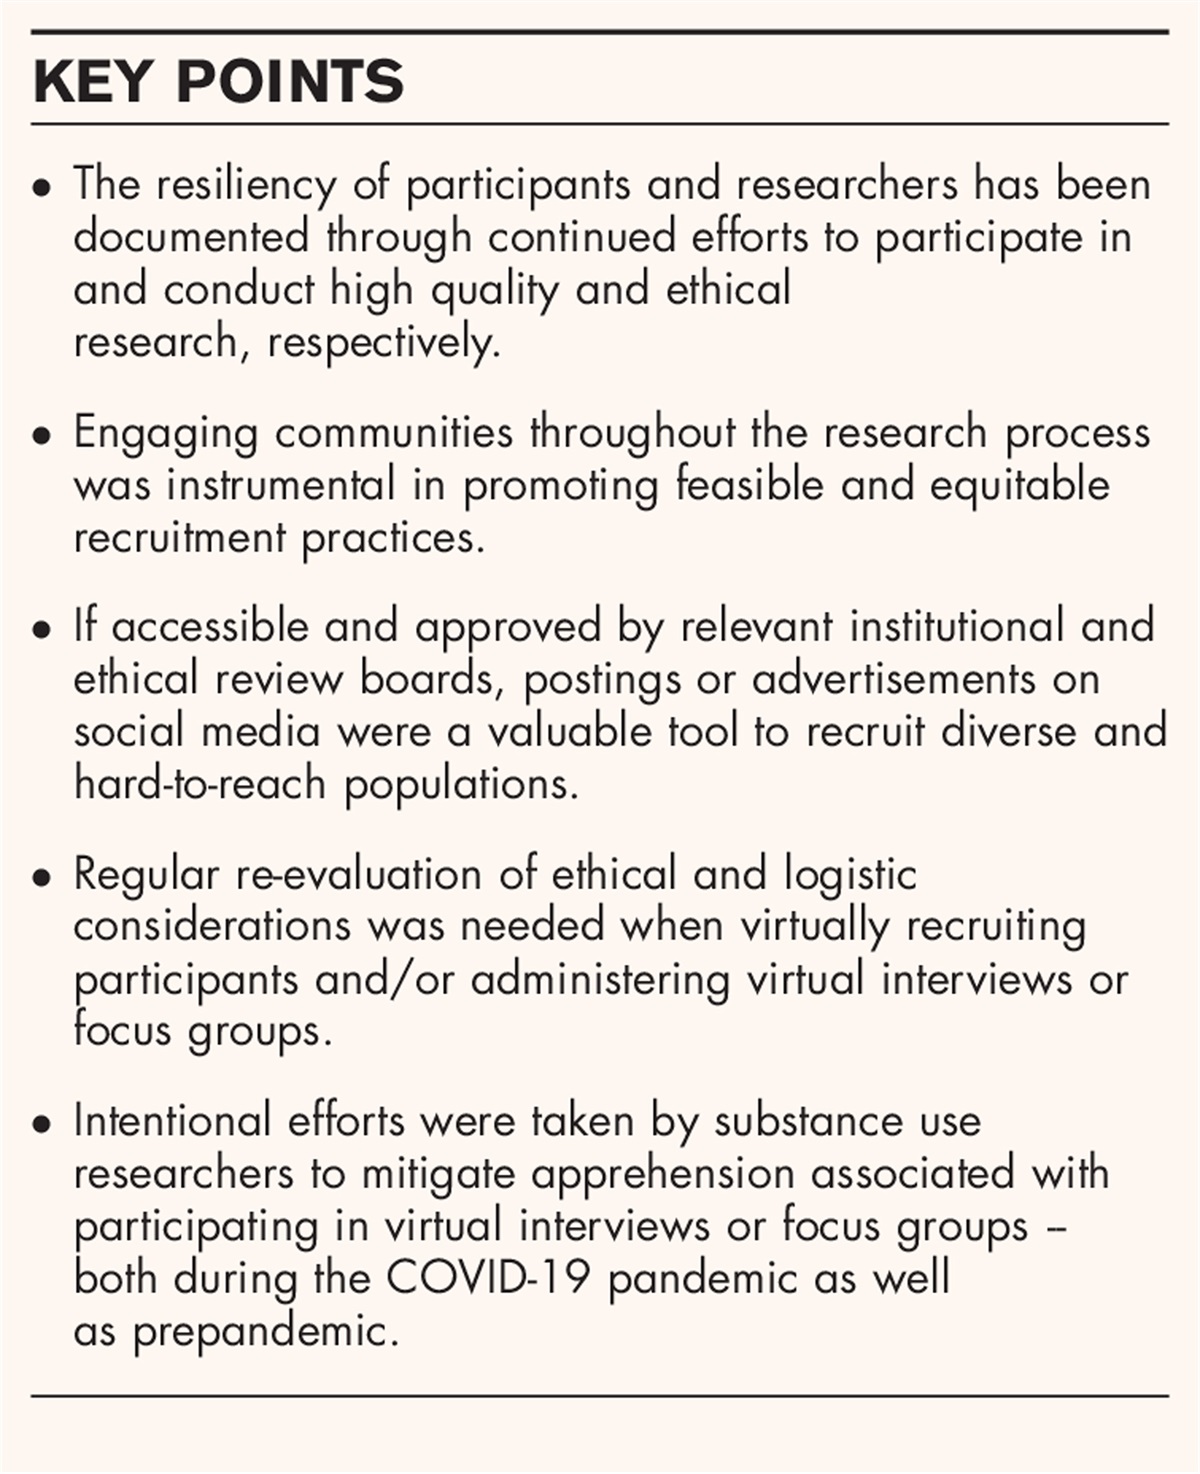 Virtual recruitment and participant engagement for substance use research during a pandemic